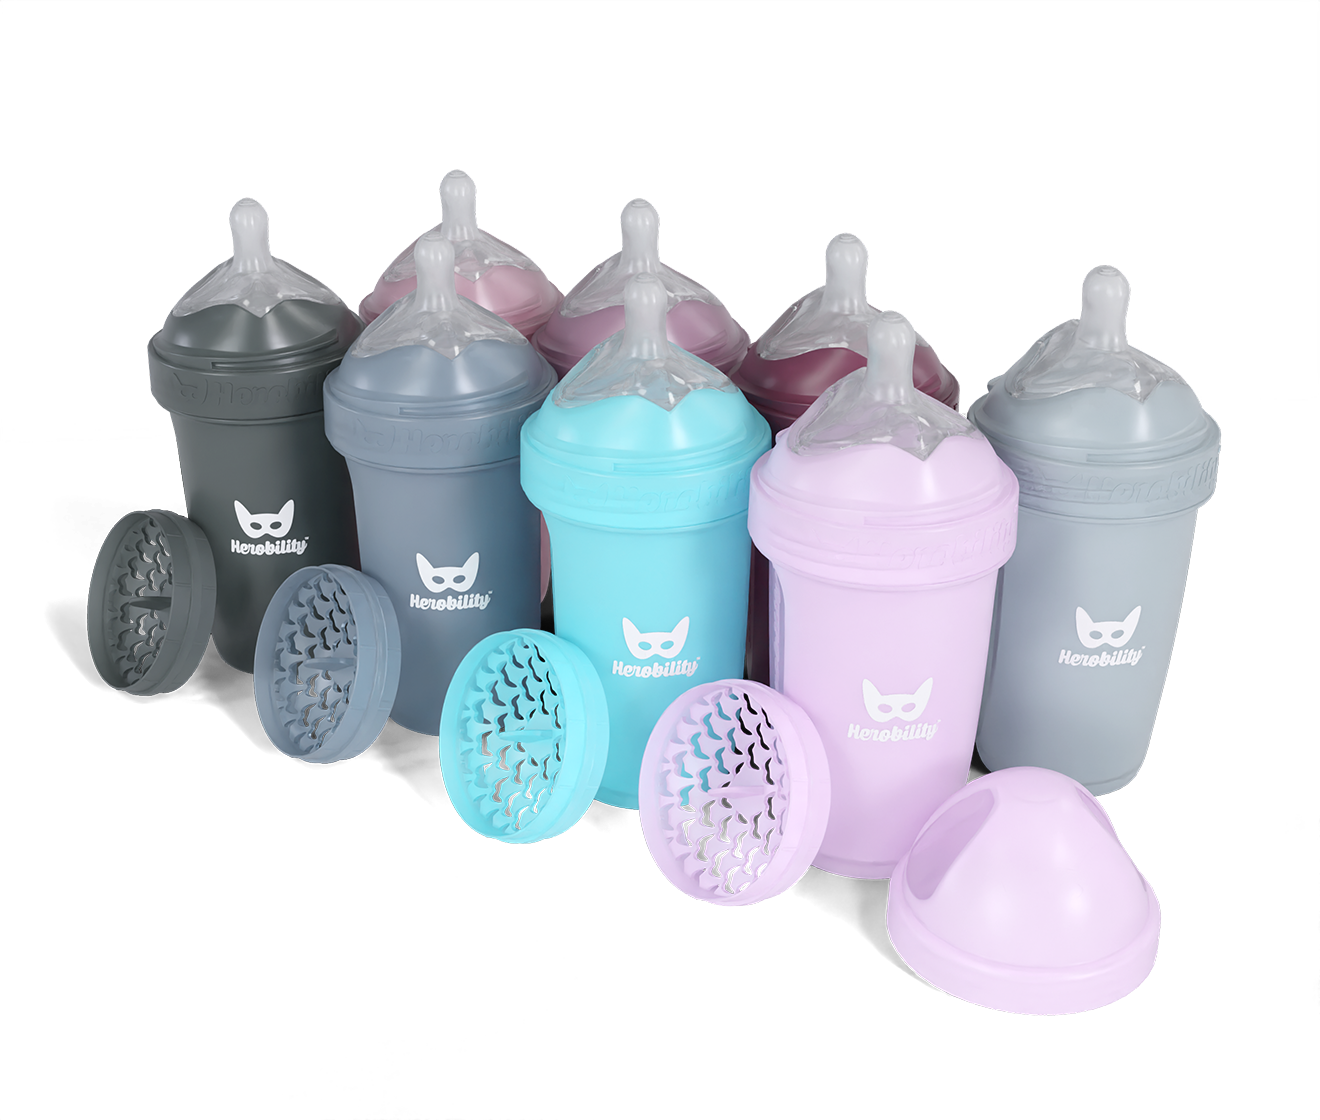 8-pack 240ml/8.5 floz Baby Bottles with 60% discount